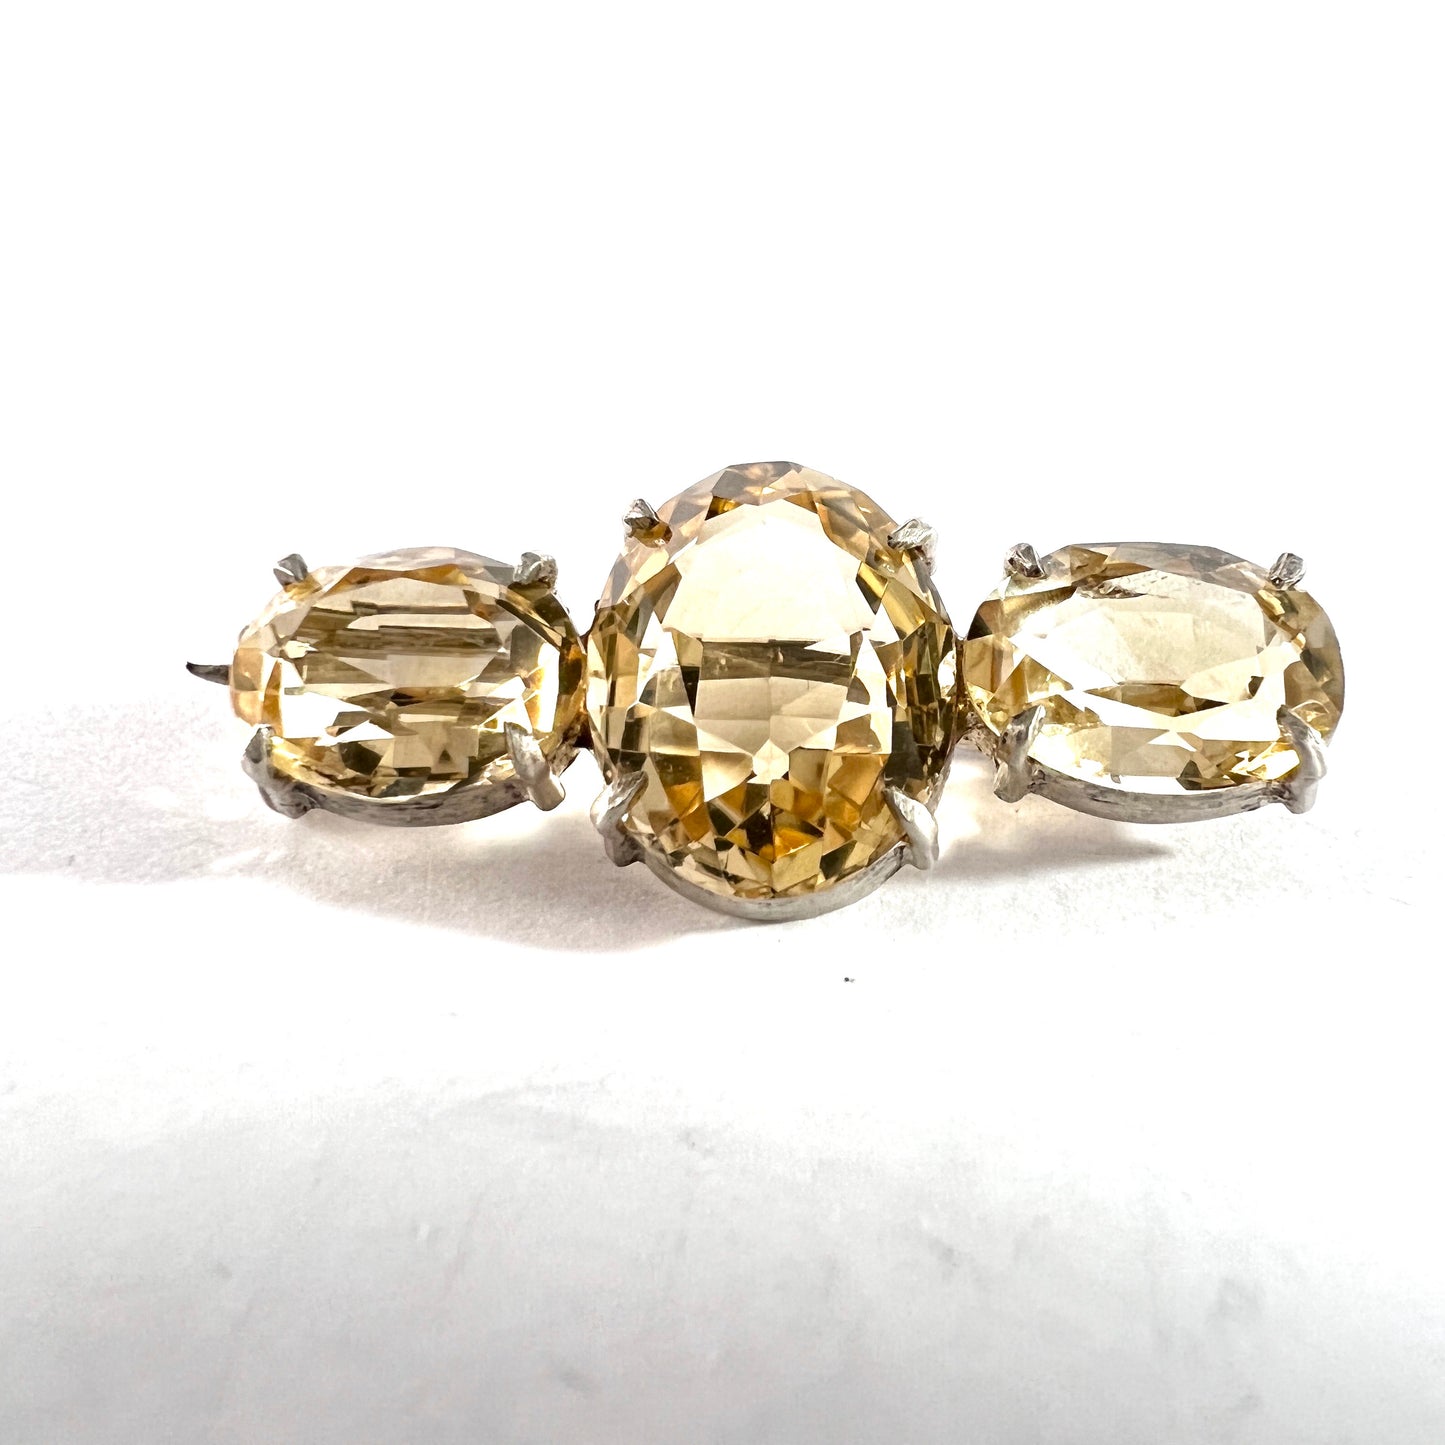 Sweden c year 1900. Antique Solid Silver Citrine Brooch Pin.